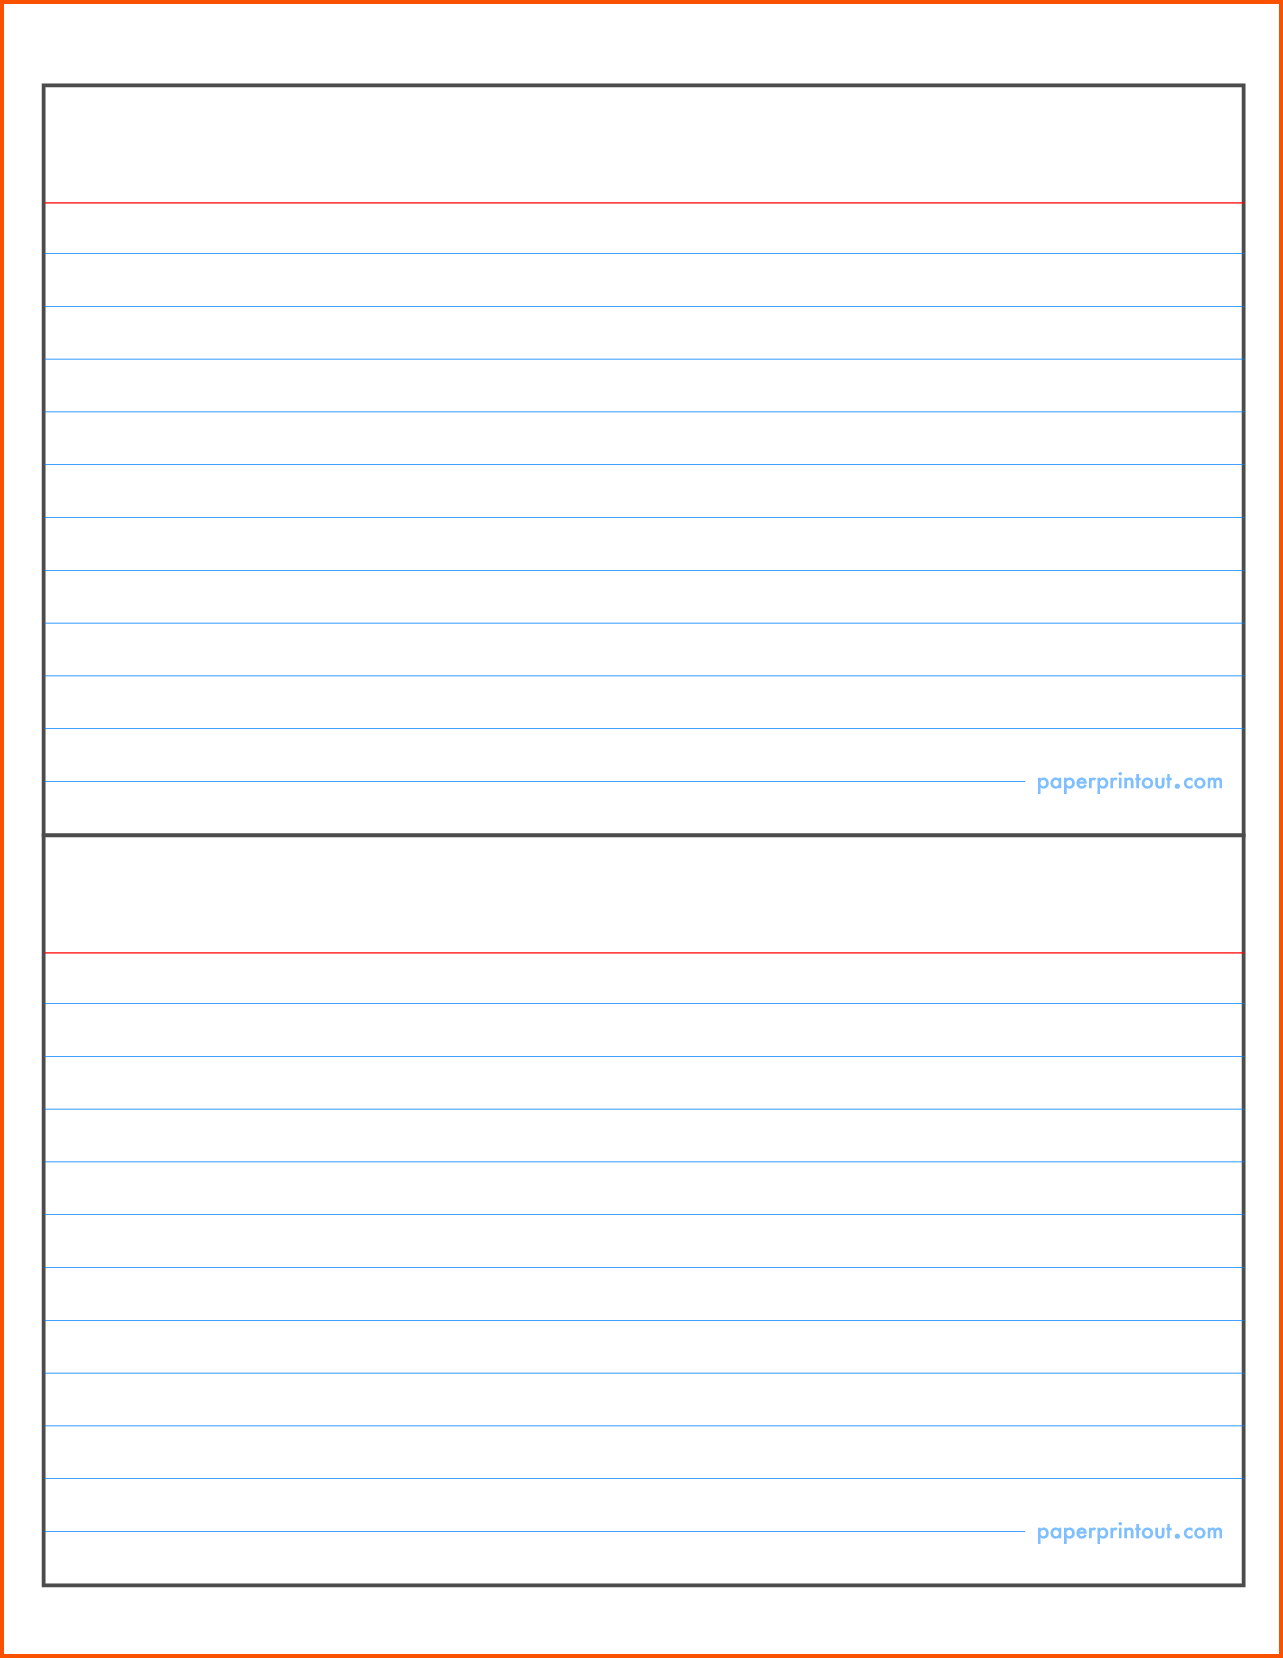 003 Template Ideas Word Indexs 127998 Impressive Index Card Throughout Blank Index Card Template